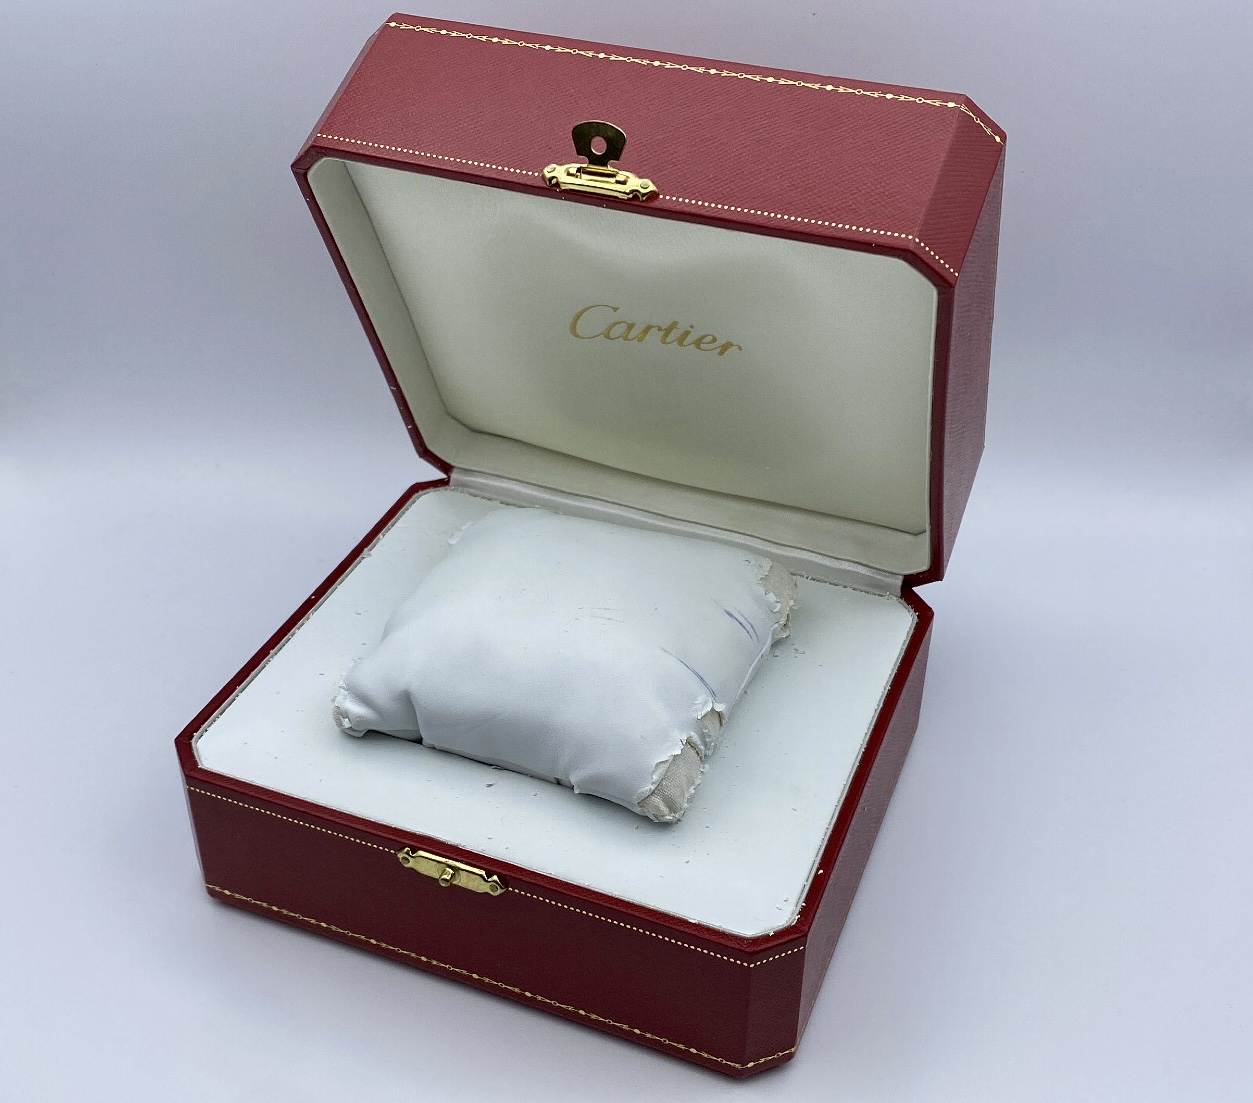 Cartier Pasha Power Reserve (Reserved) - 1033